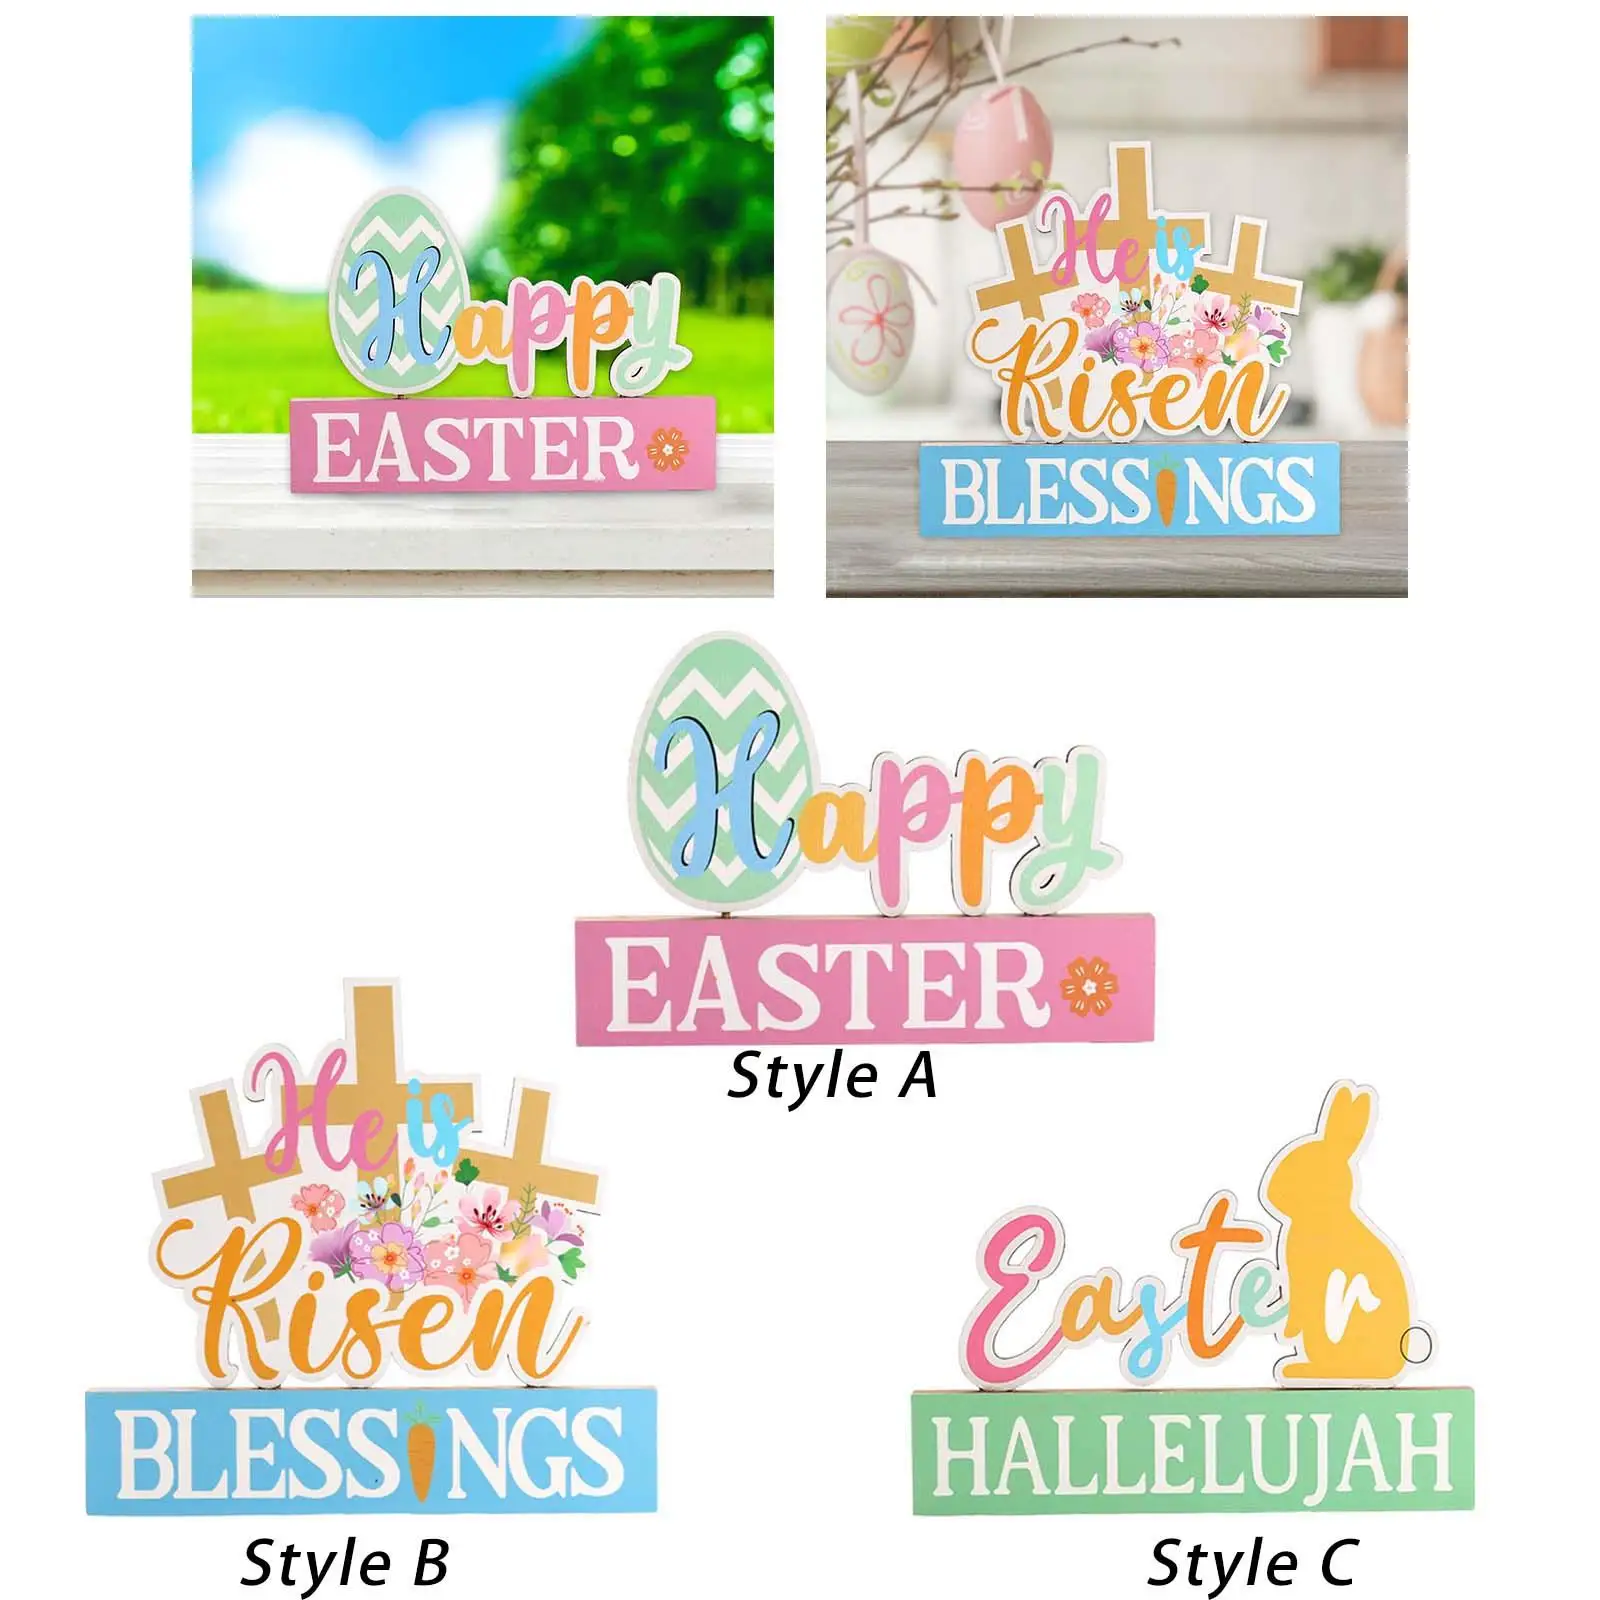 Happy Easter Table Decorations Letter Sign Colorful Centerpieces for Holiday